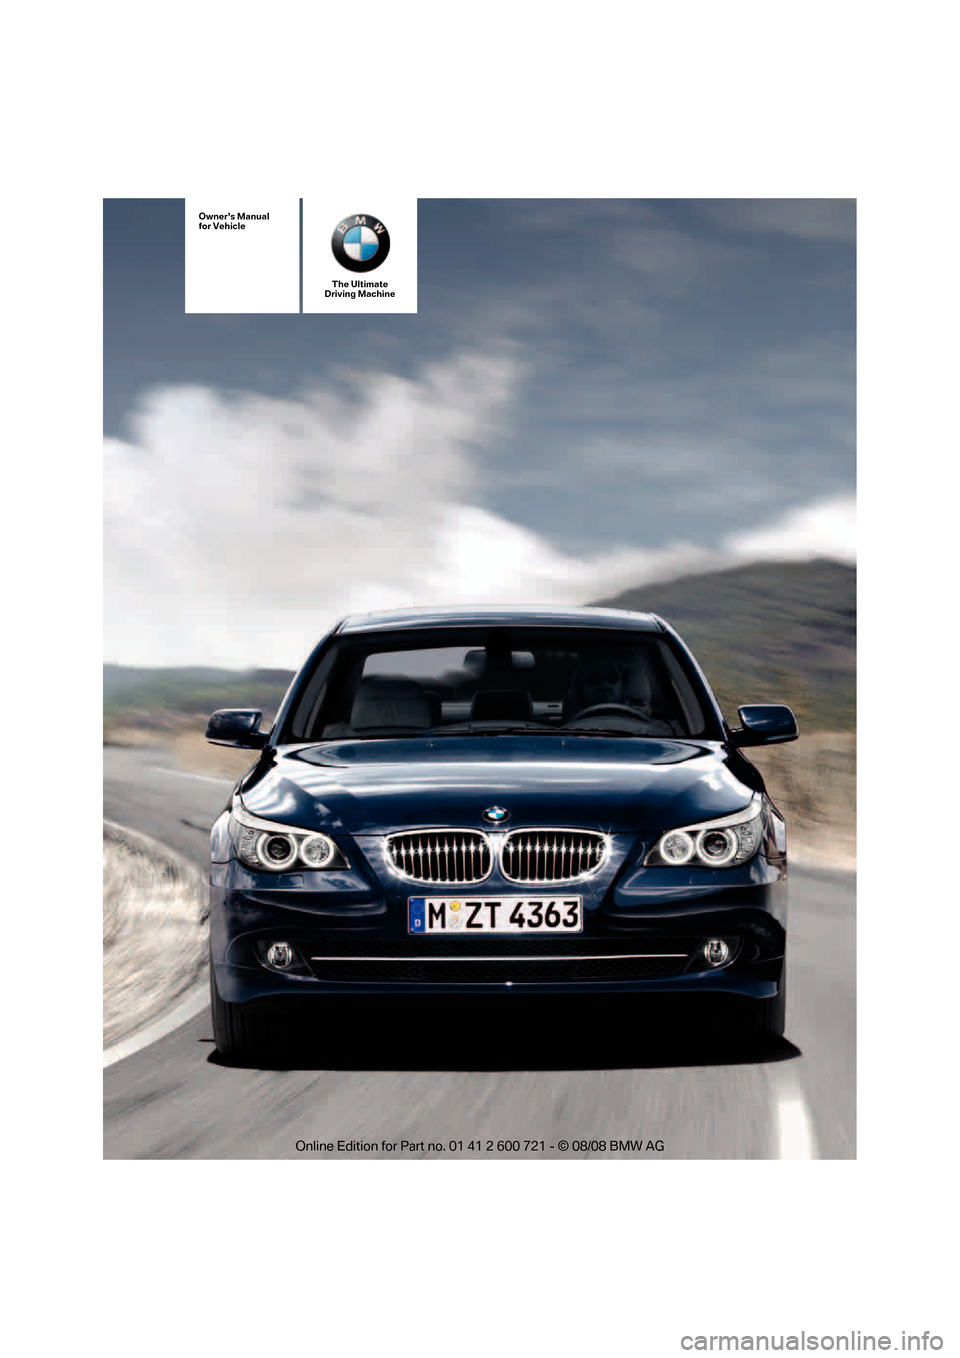 BMW 525I TOURING 2009 E61 Owners Manual The Ultimate
Driving Machine
Owners Manual
for Vehicle 